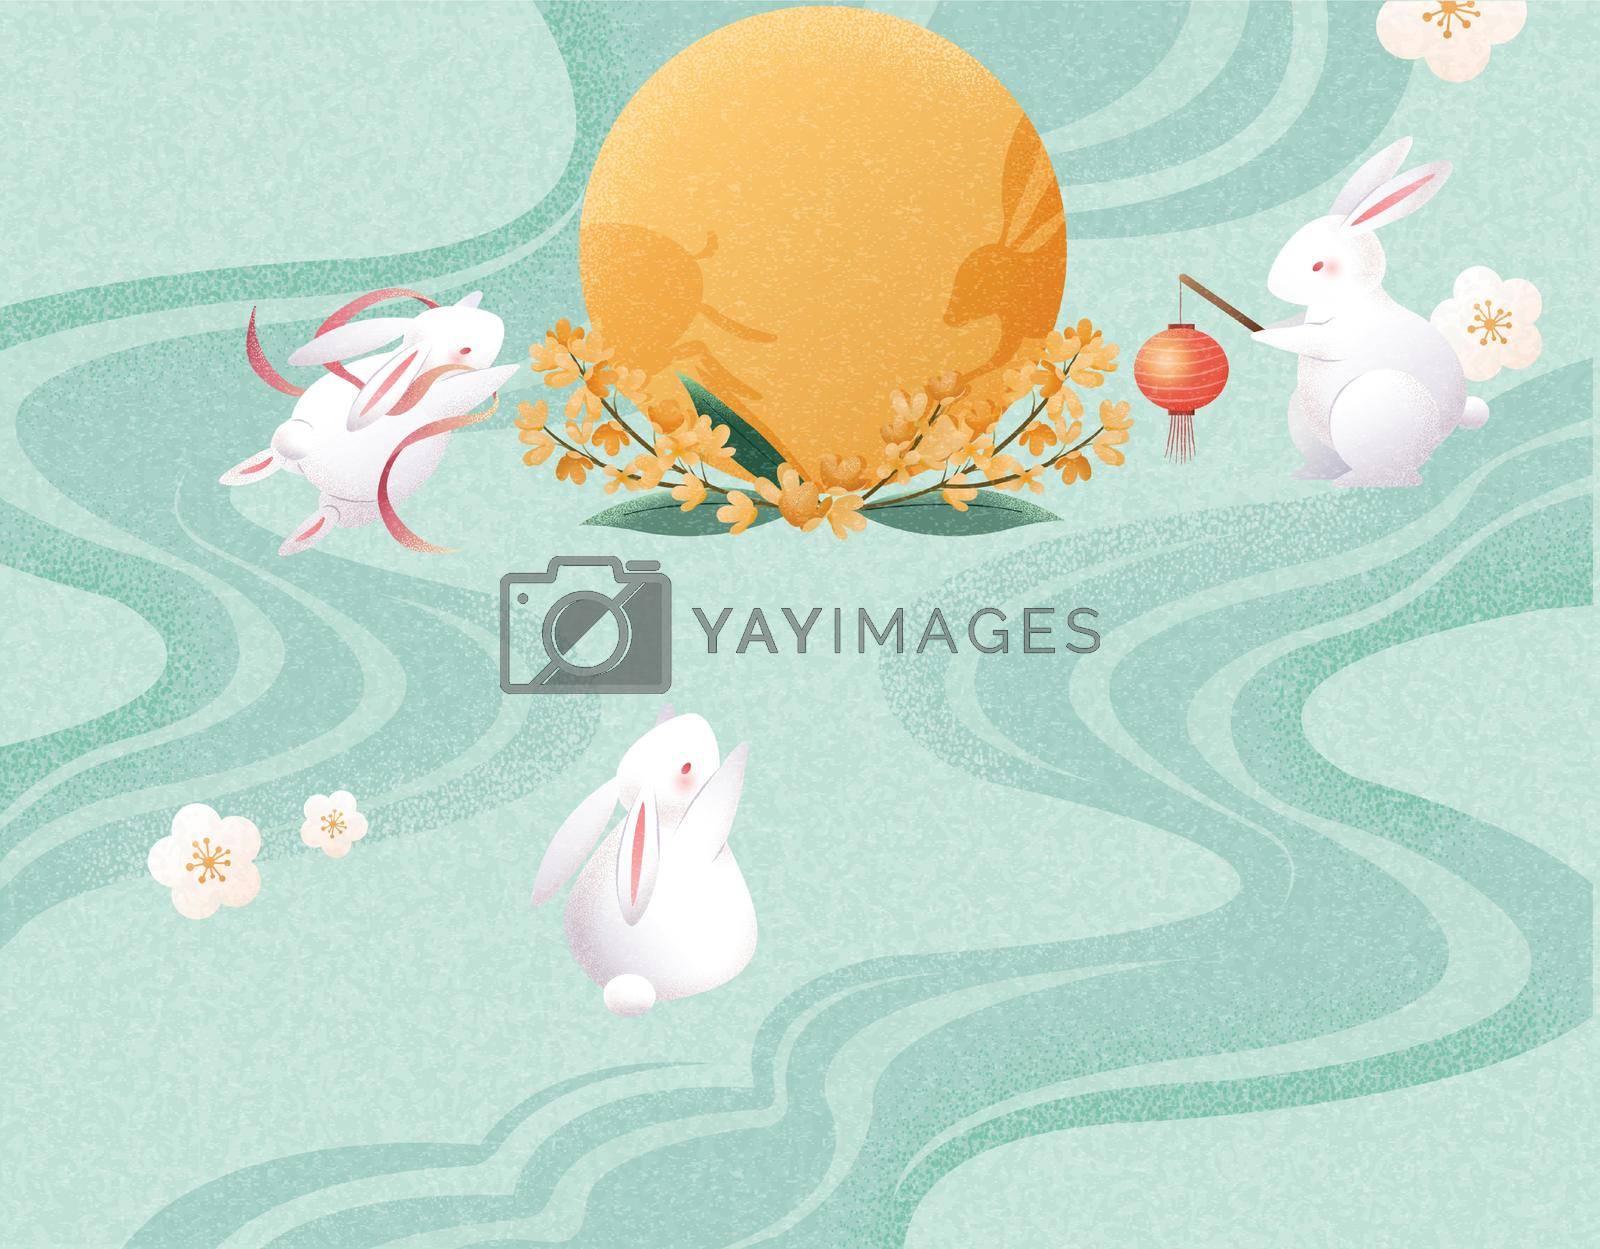 Royalty free image of Cute mid autumn festival illustration with rabbits by Vinhsino